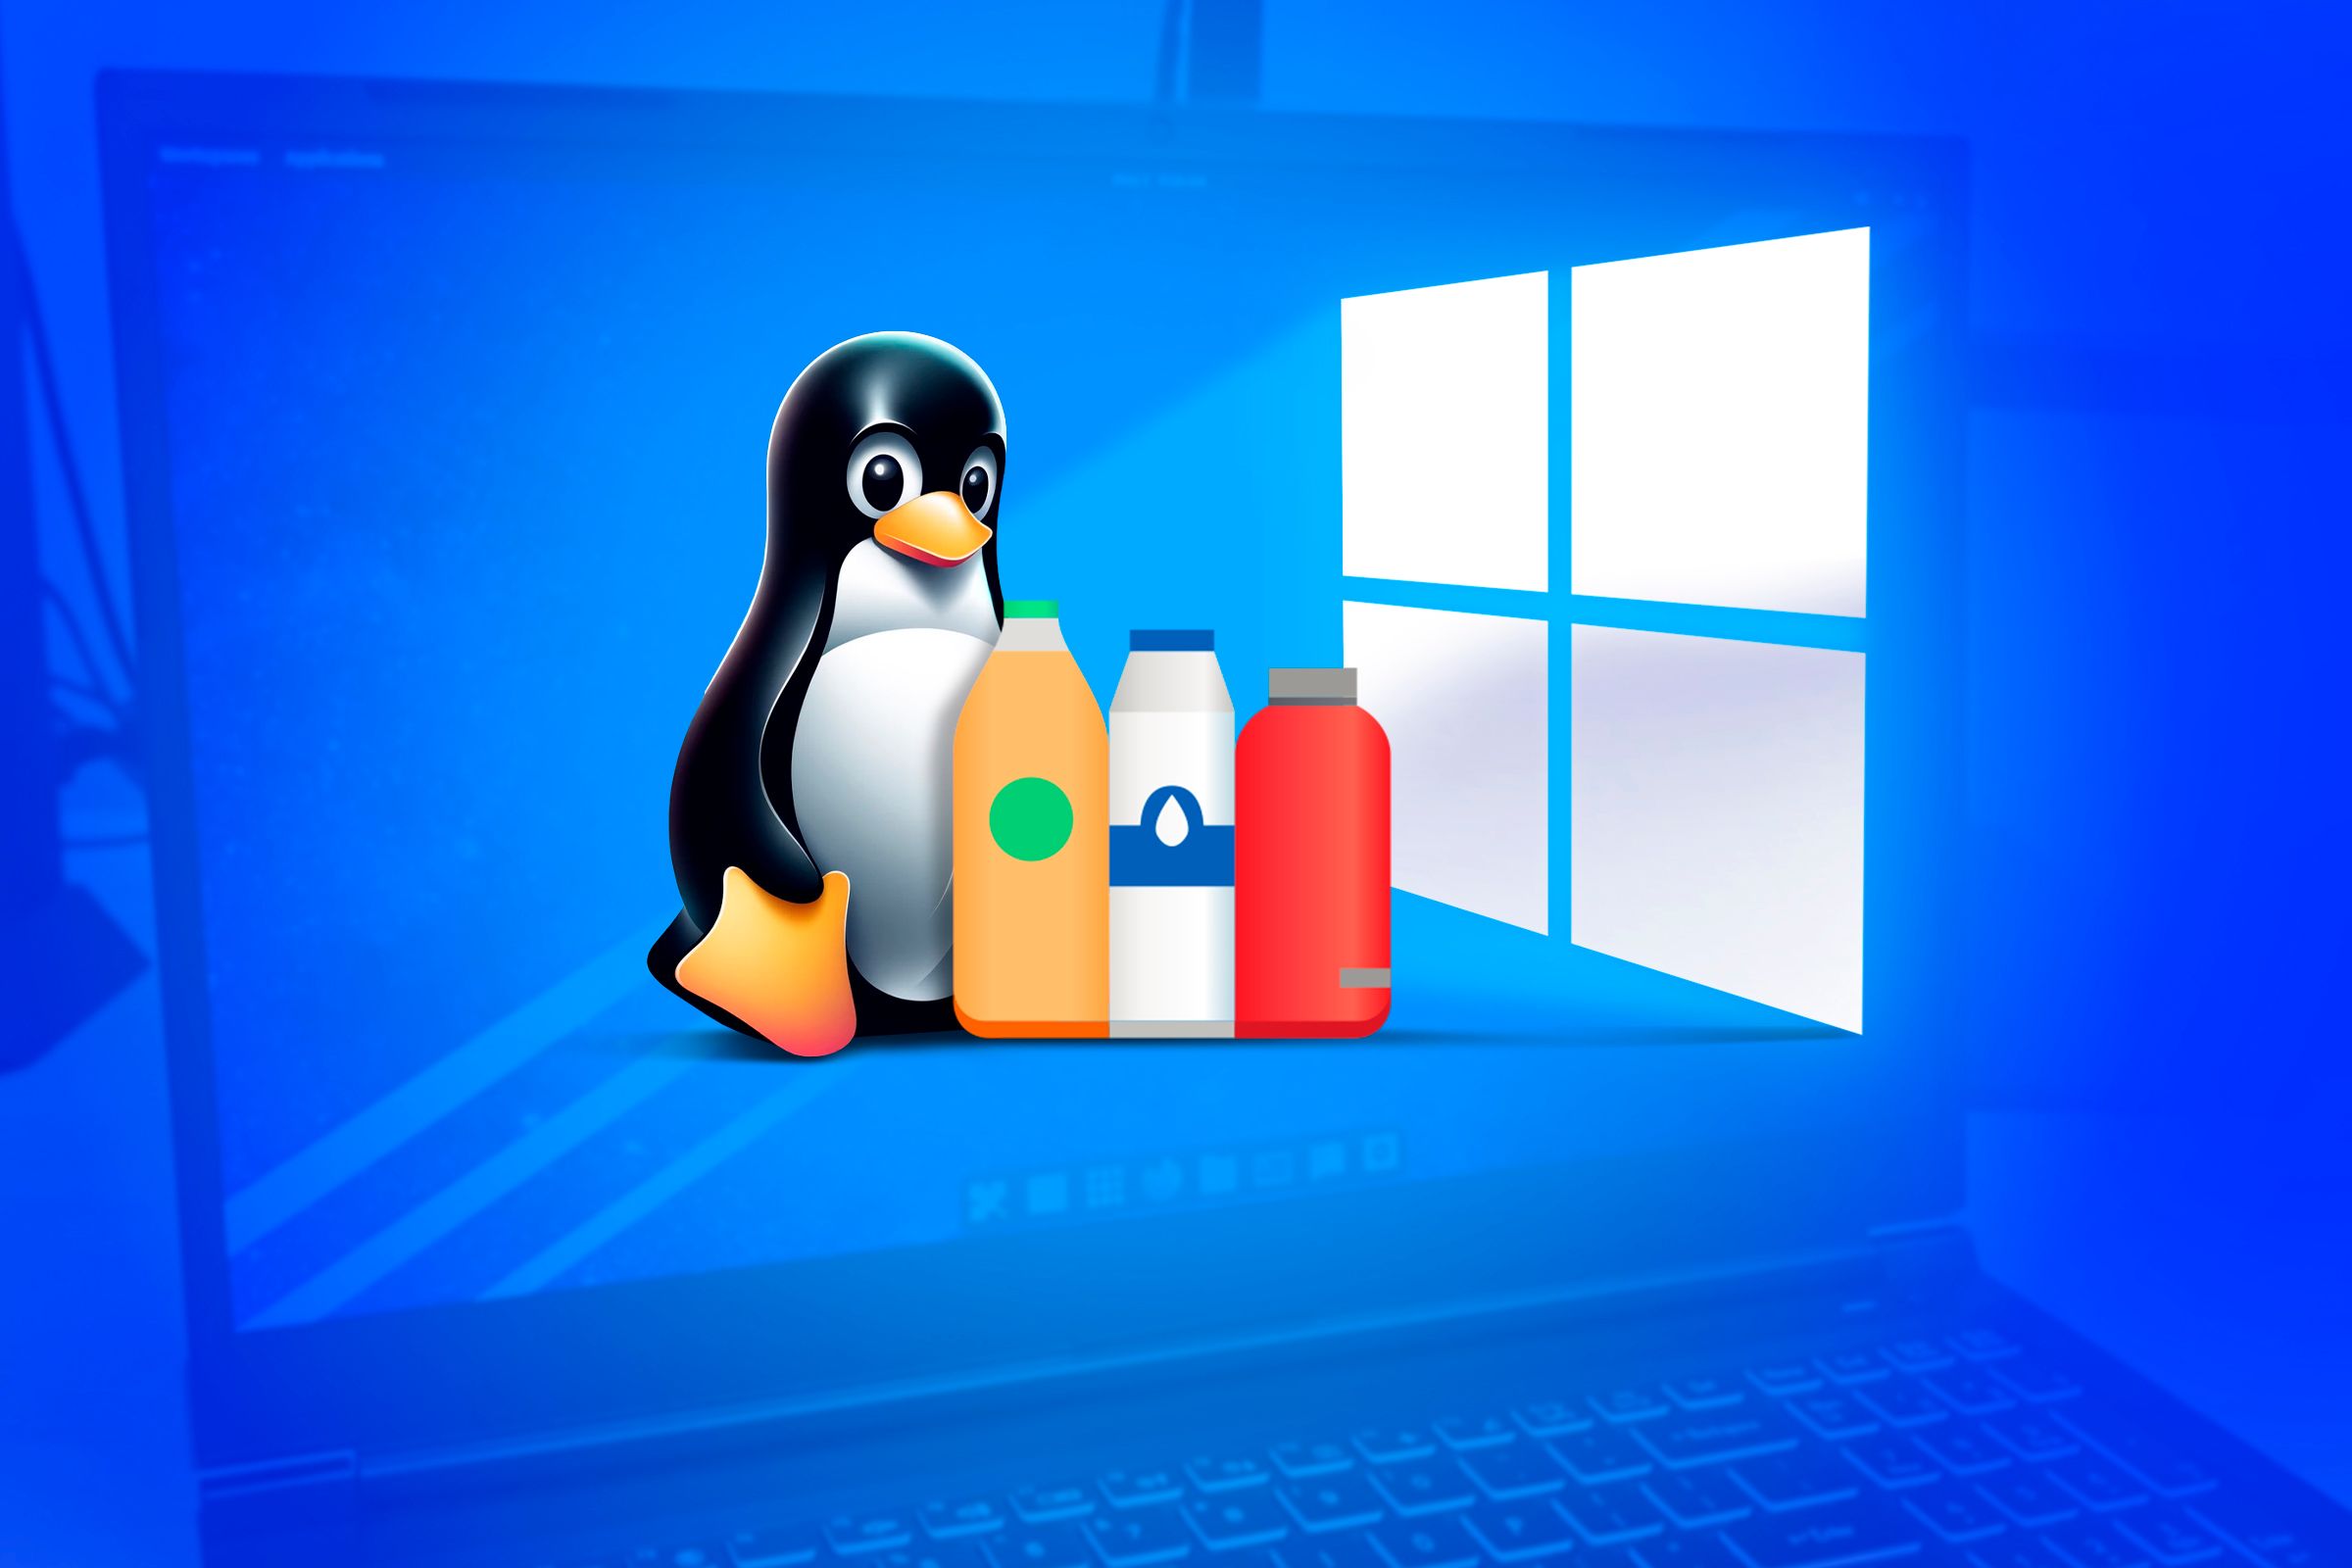 On the left, the Linux mascot and the bottle app logo, on the right, the Windows logo